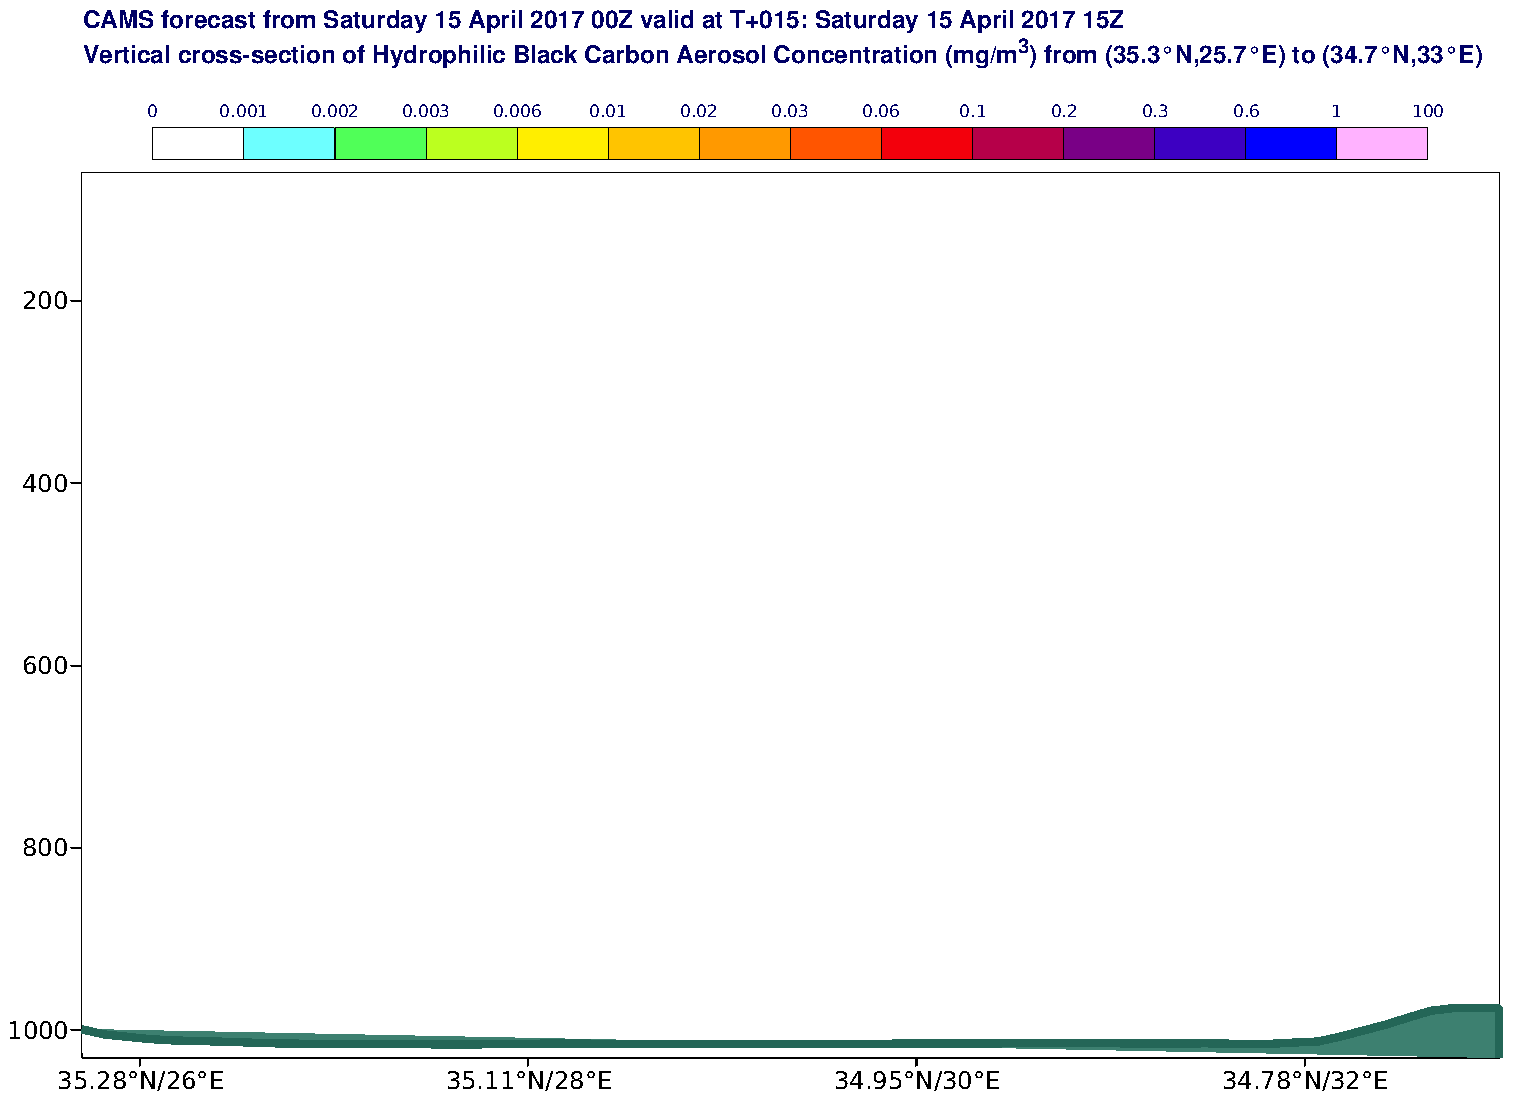 Vertical cross-section of Hydrophilic Black Carbon Aerosol Concentration (mg/m3) valid at T15 - 2017-04-15 15:00